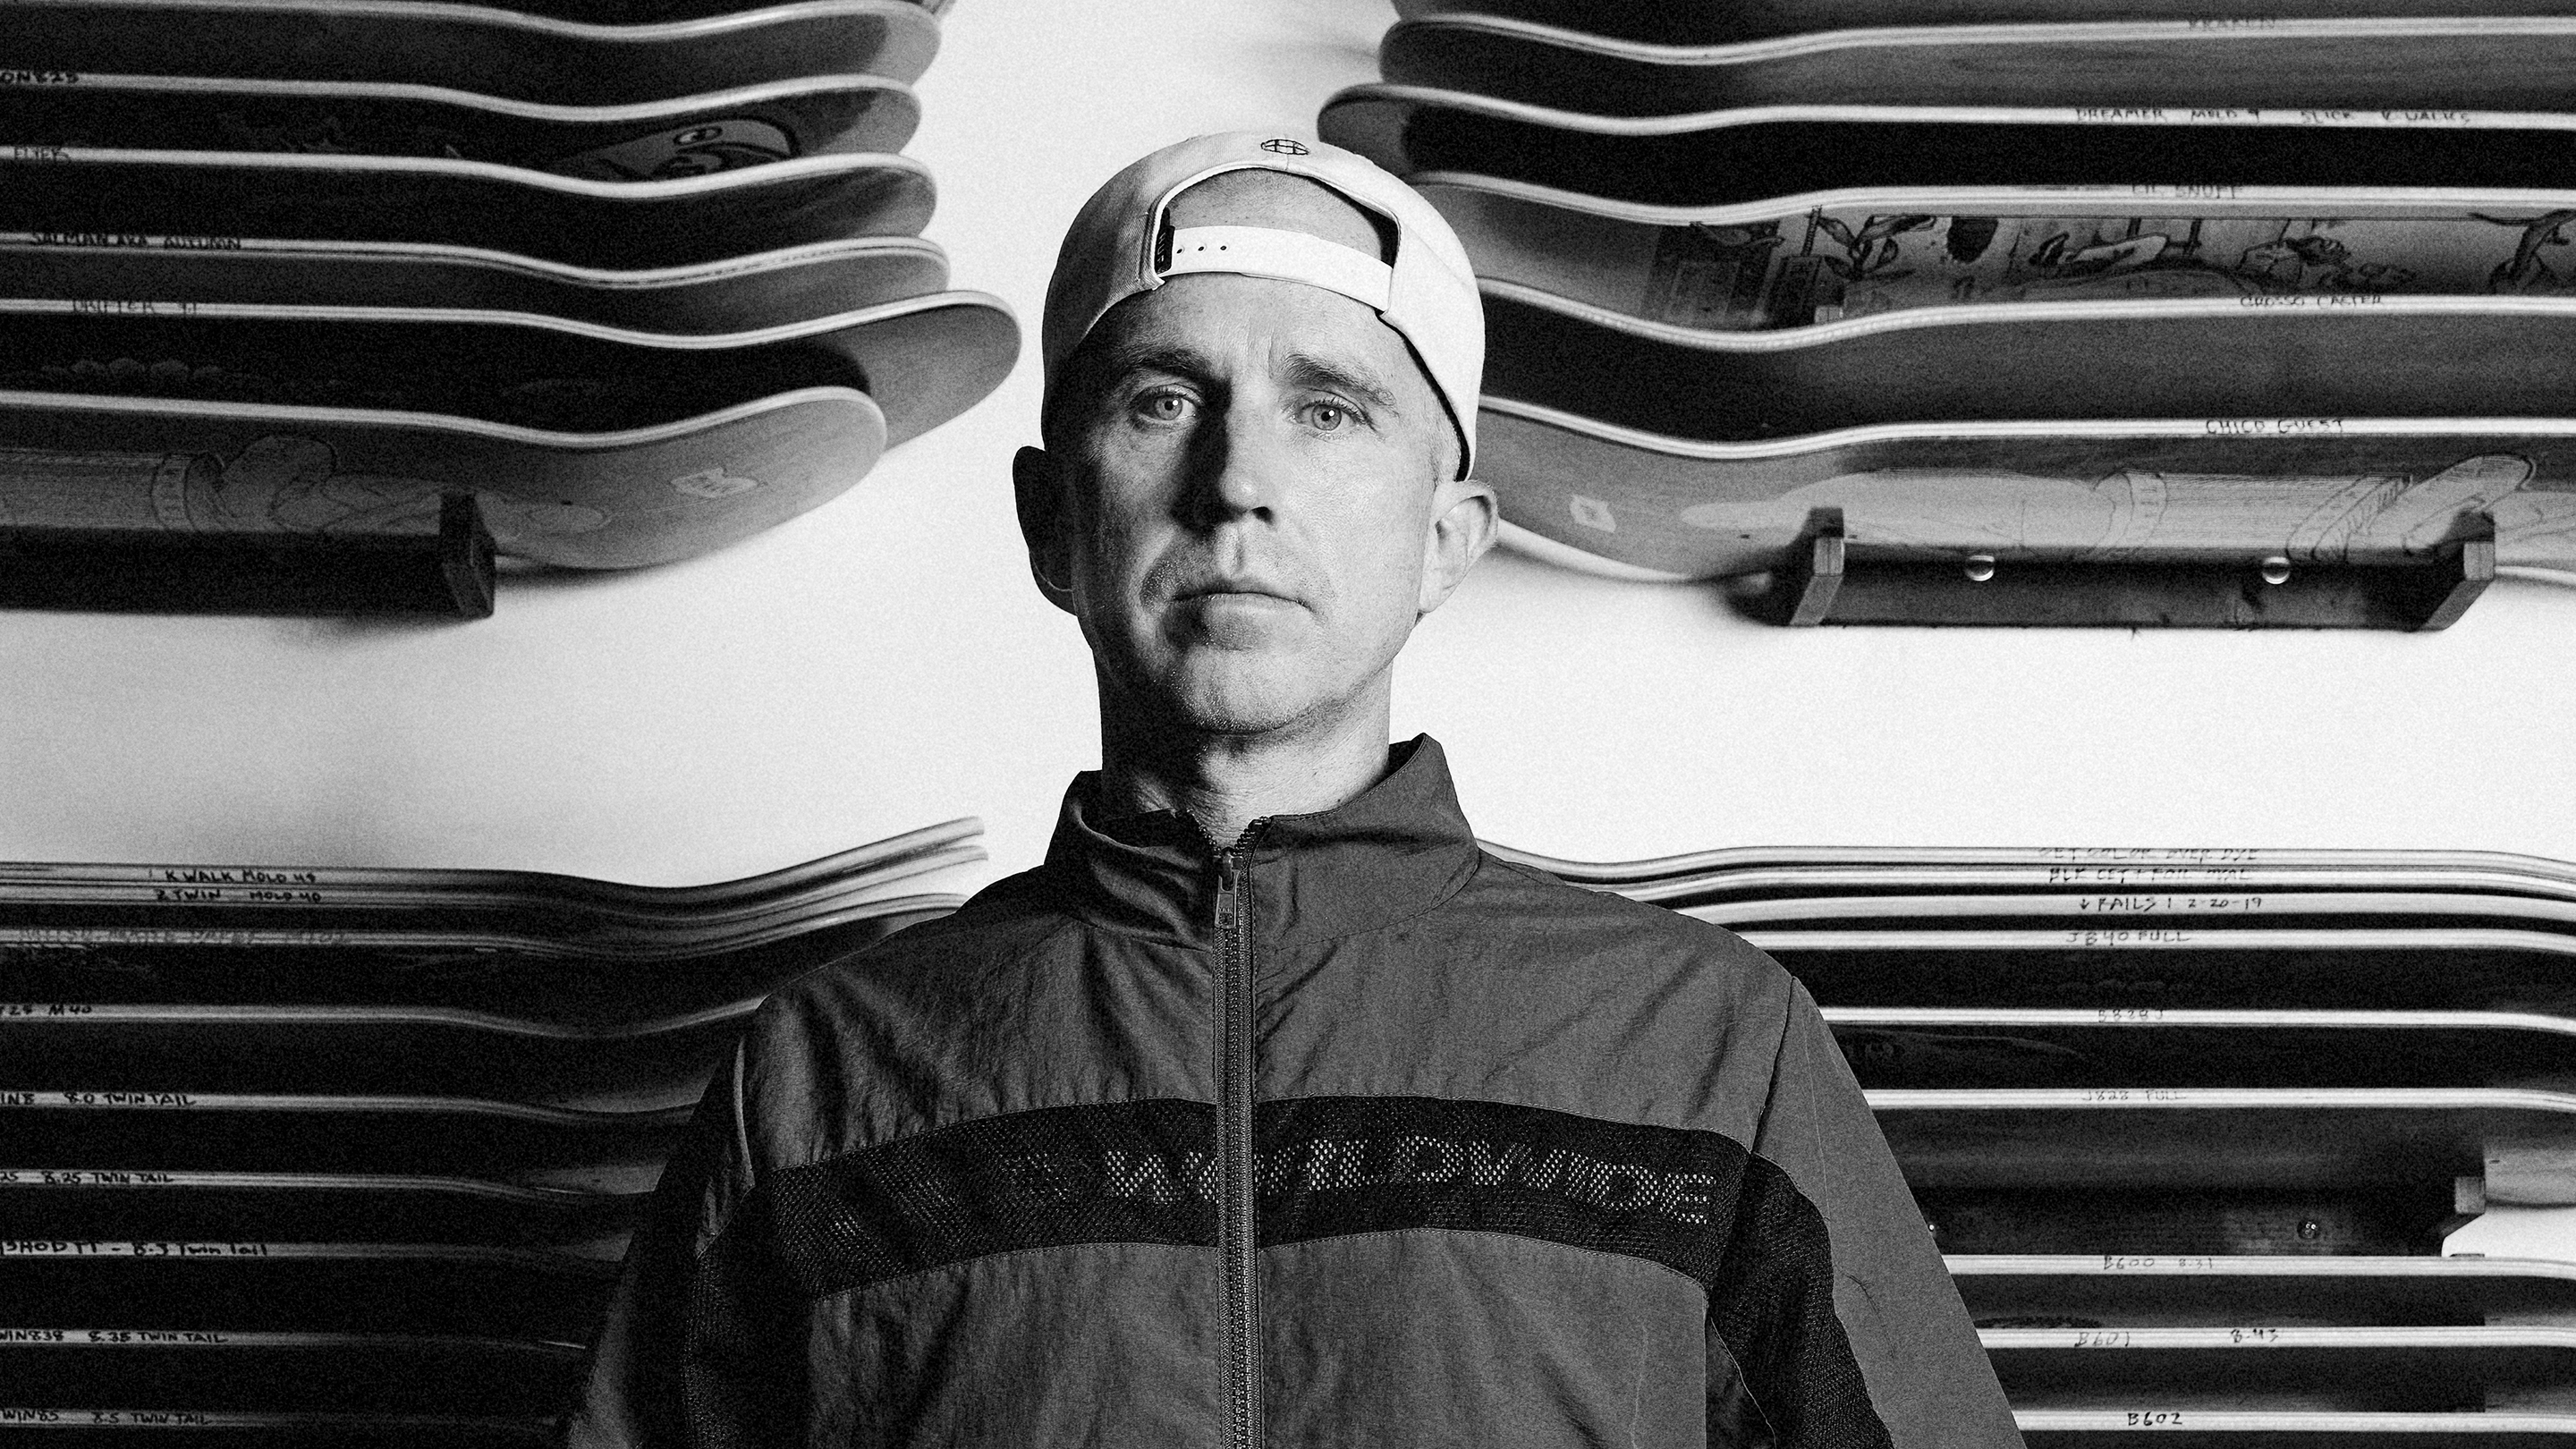 Man in His Domain: HUF Founder, Keith Hufnagel, on Skating and